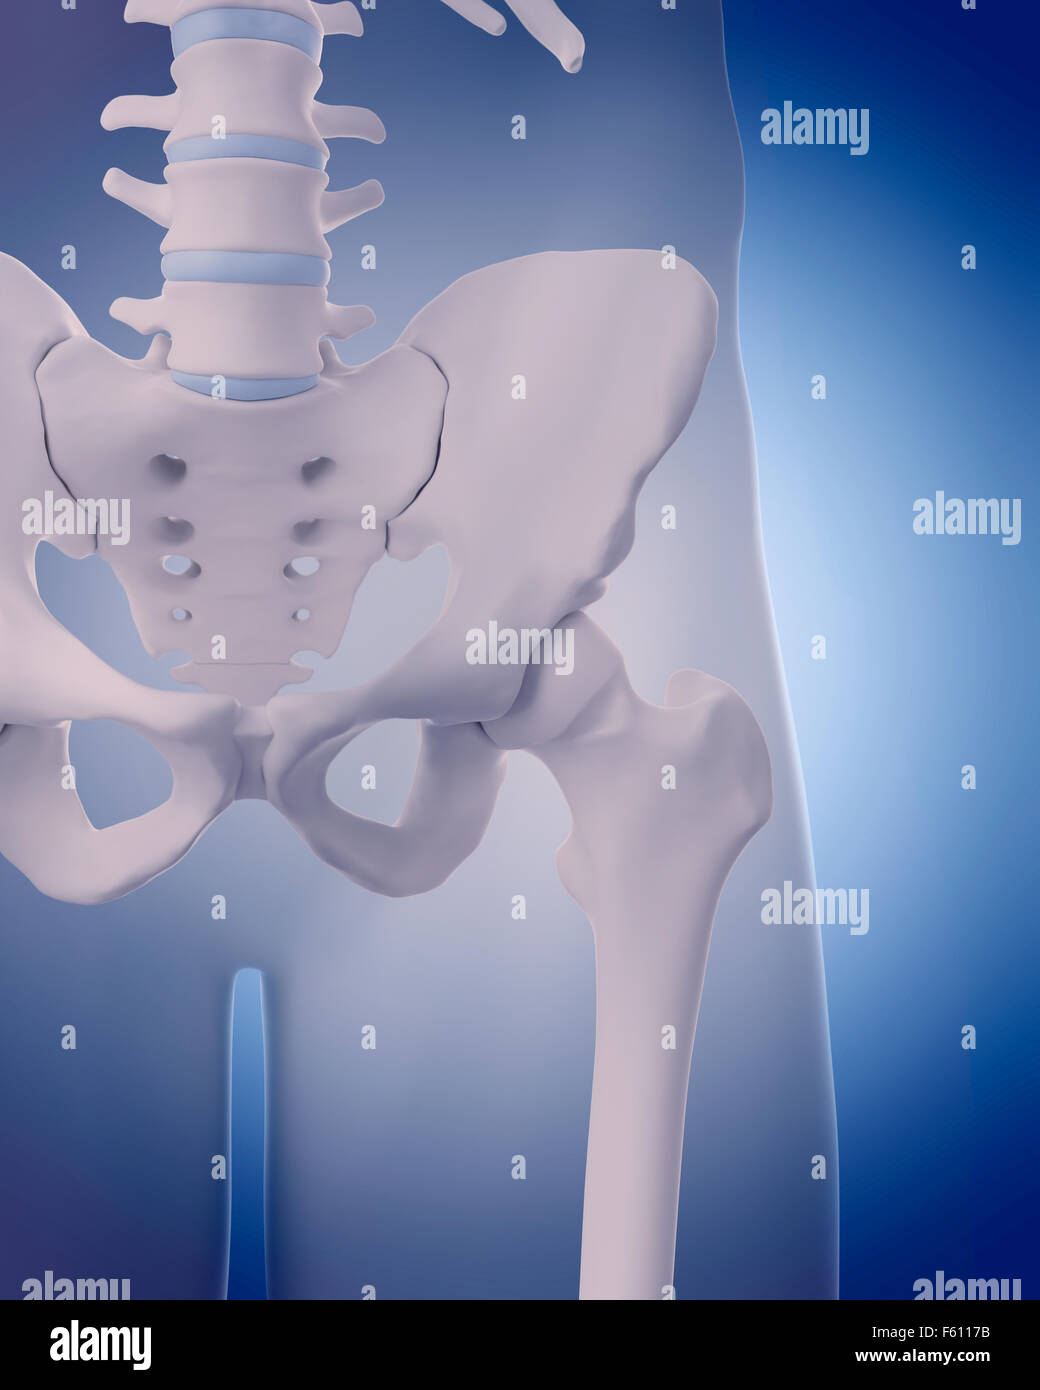 medically accurate illustration - bones of the hip Stock Photo